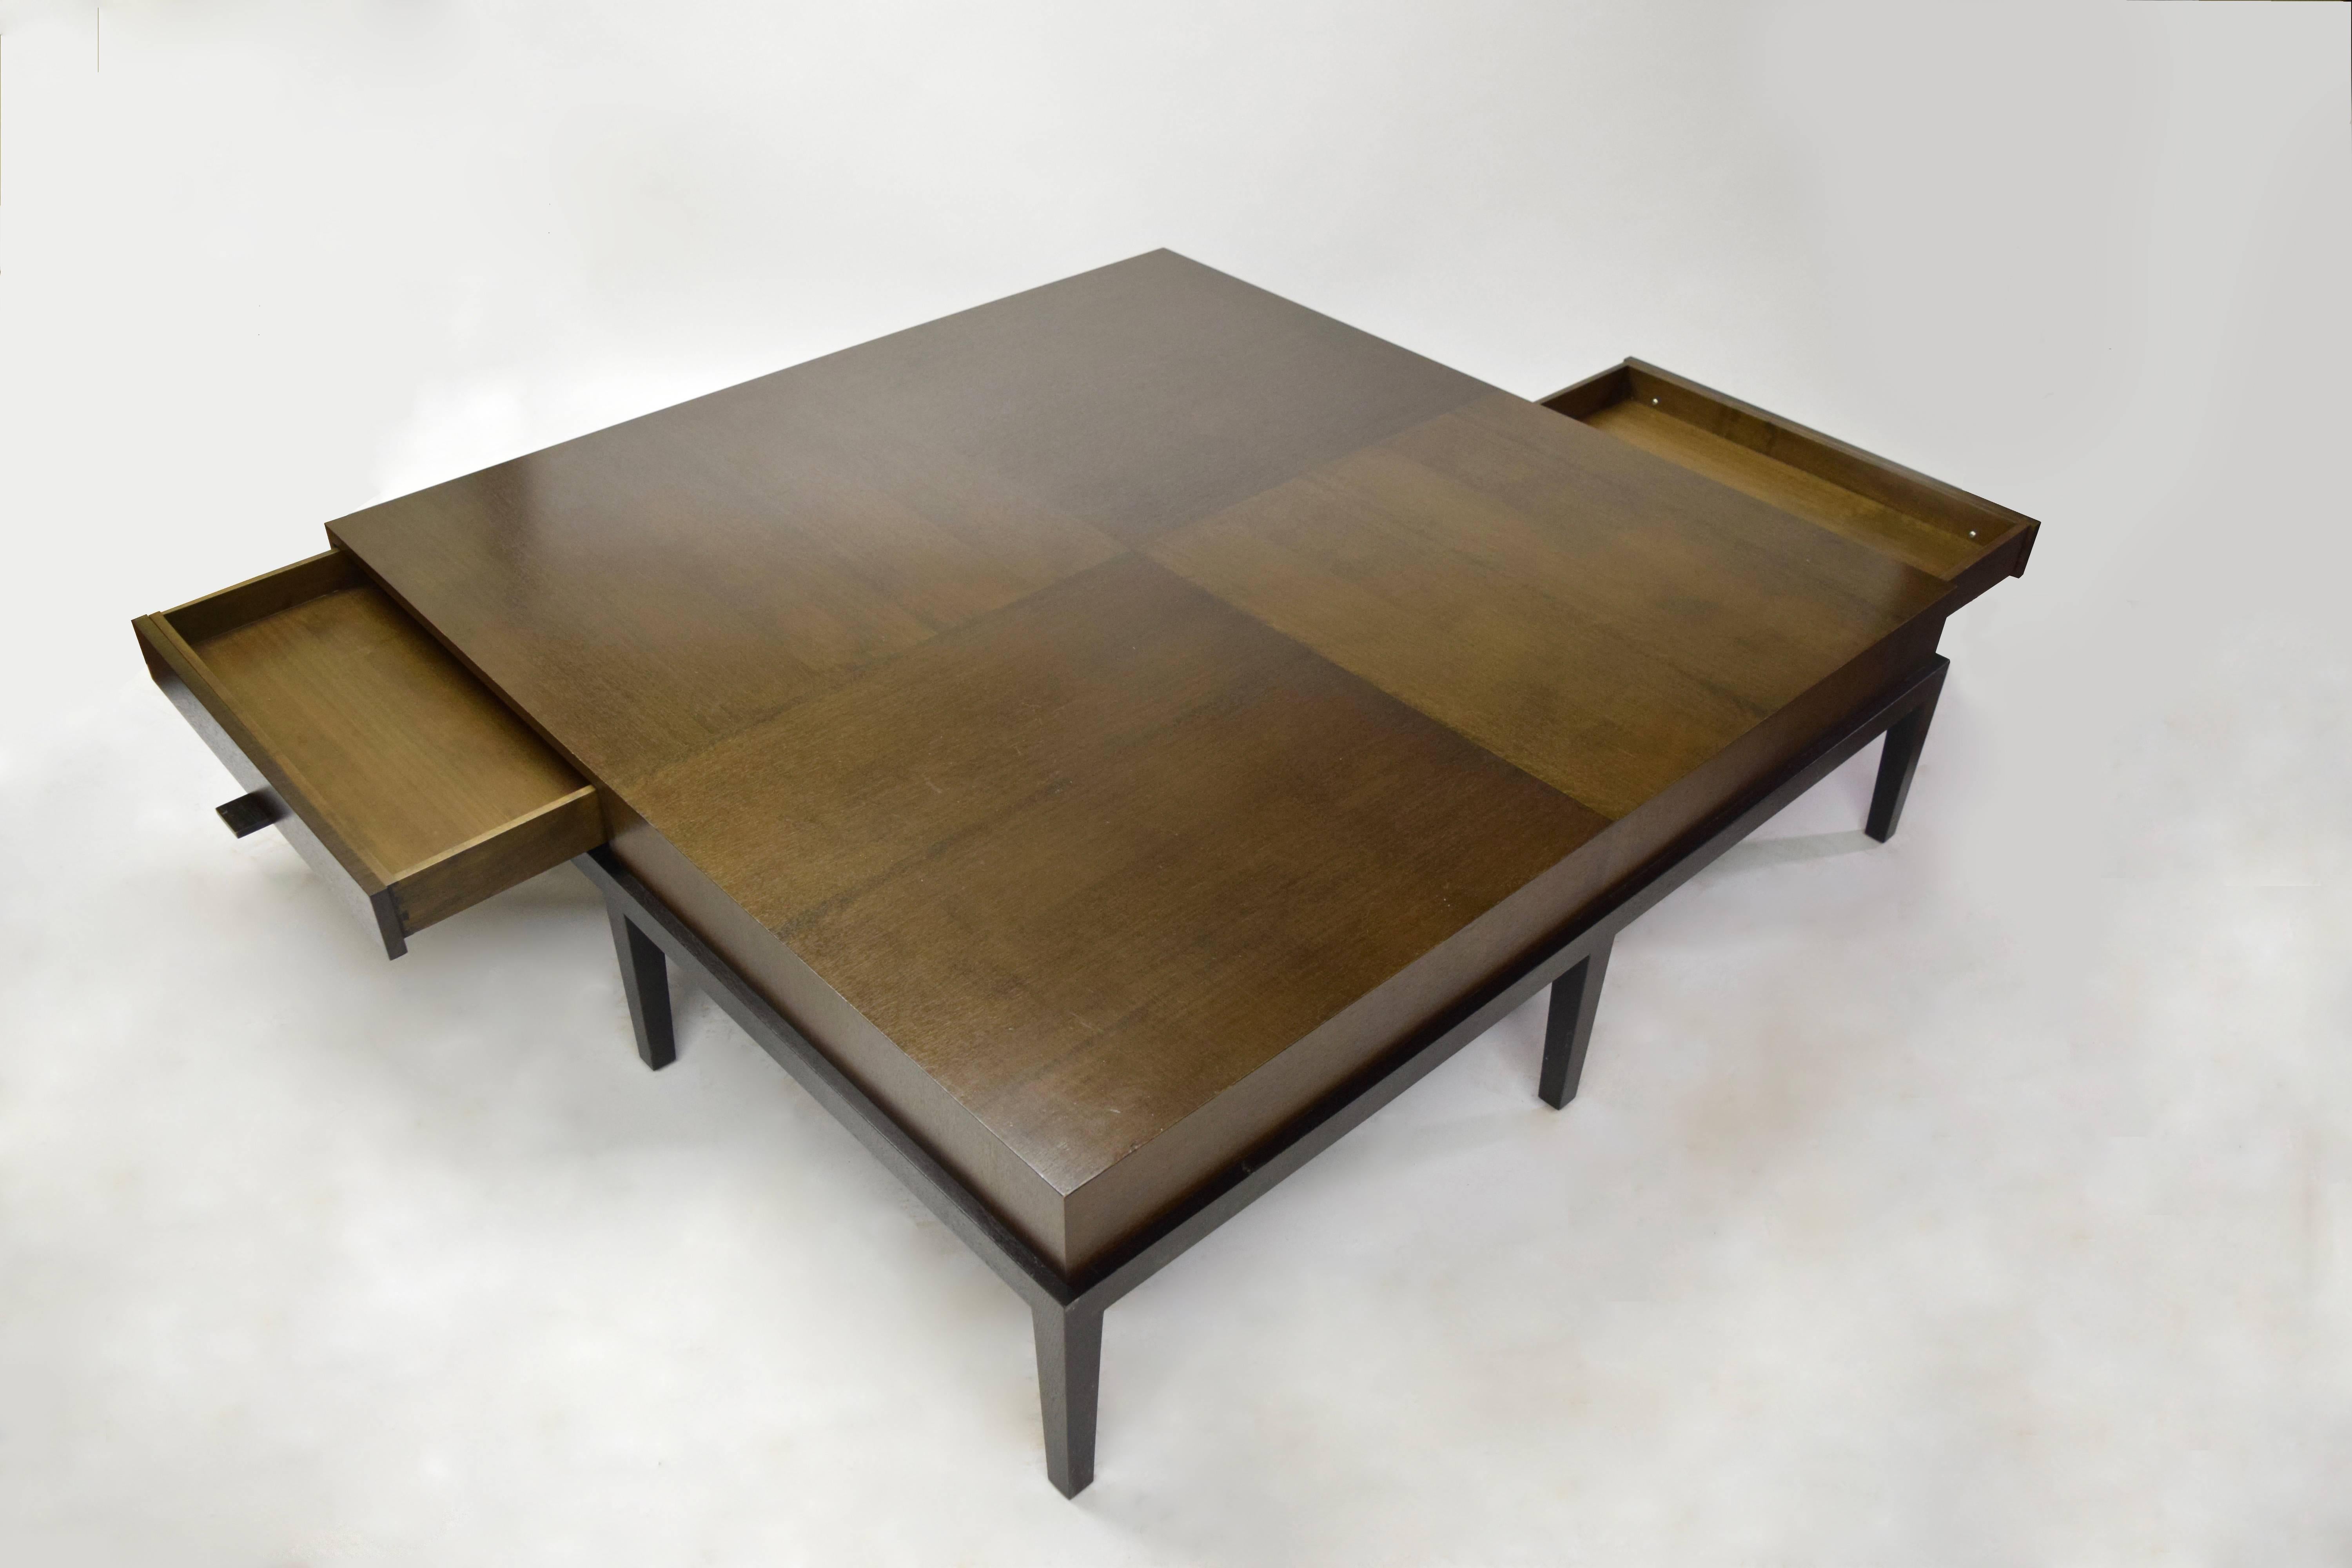 Modern Coffee Table by Christian Liaigre for Holly Hunt, circa 1990, American